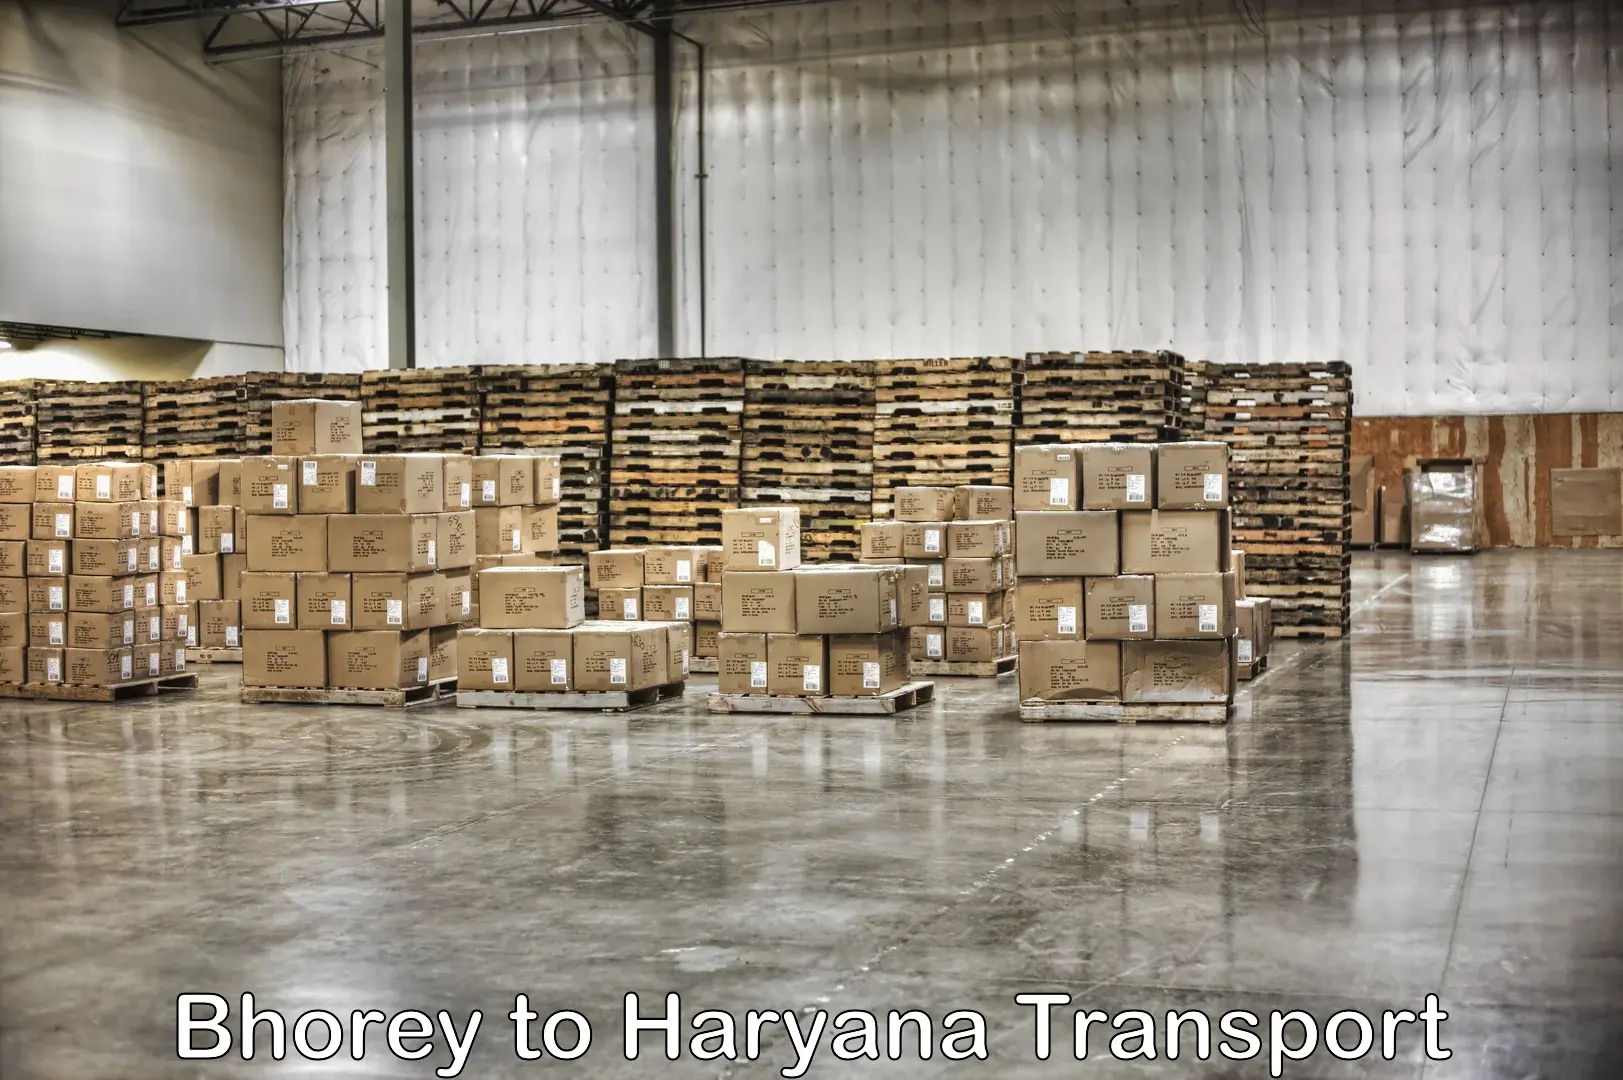 Part load transport service in India Bhorey to Gurgaon